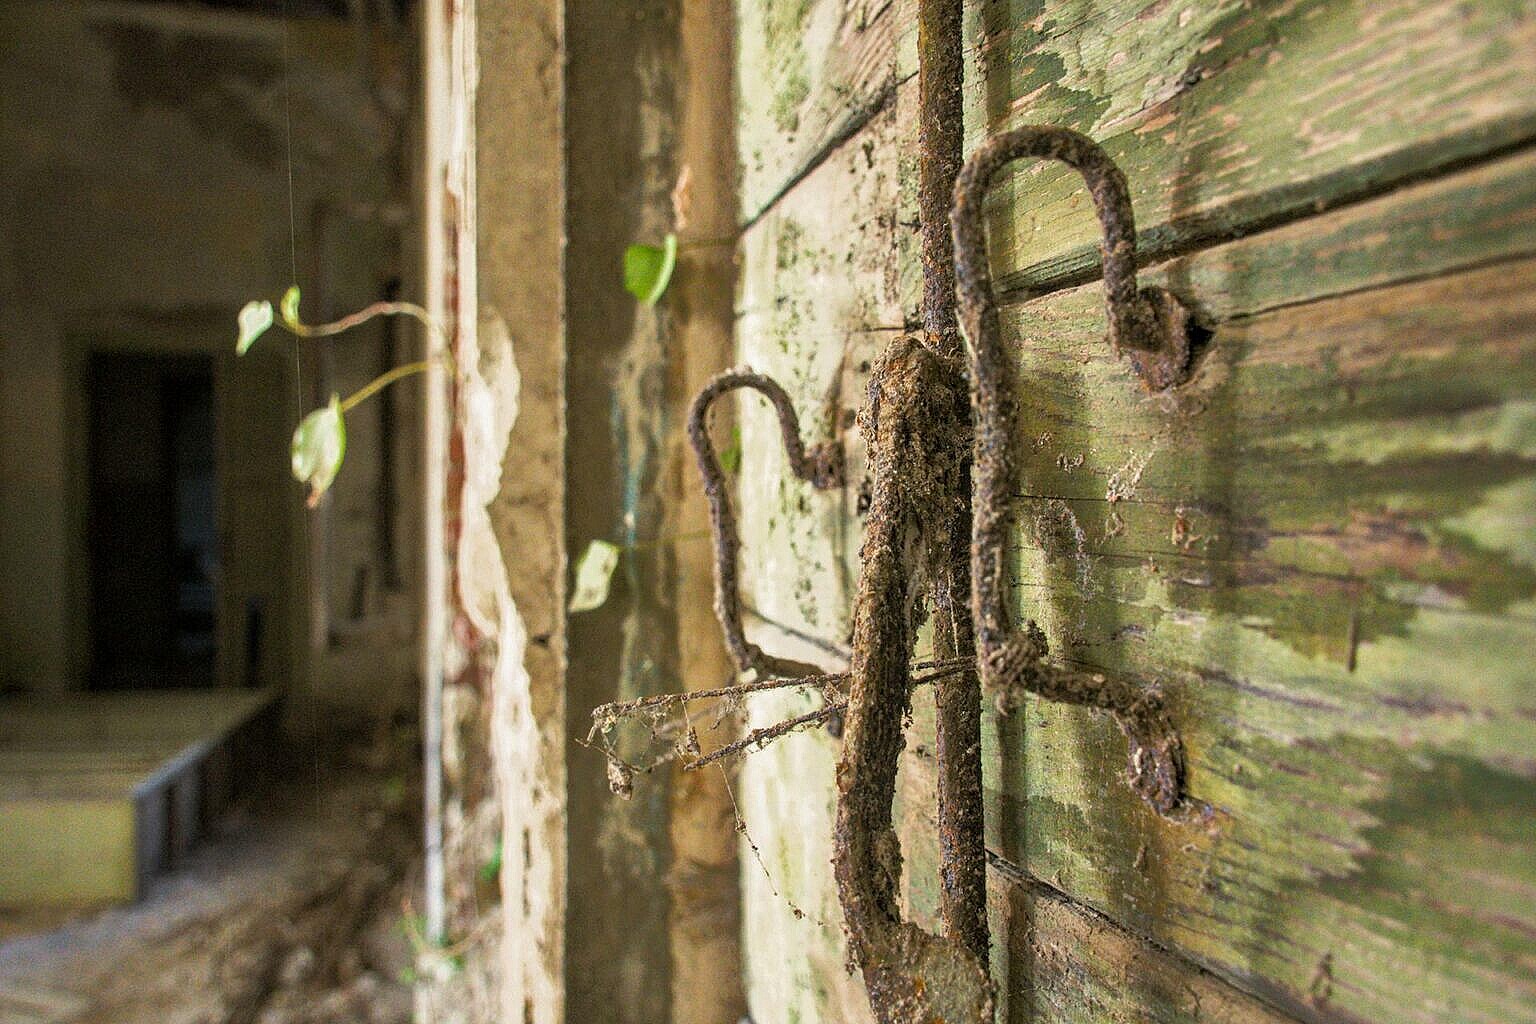 Details of window shutters in the abandoned hospital on Poveglia